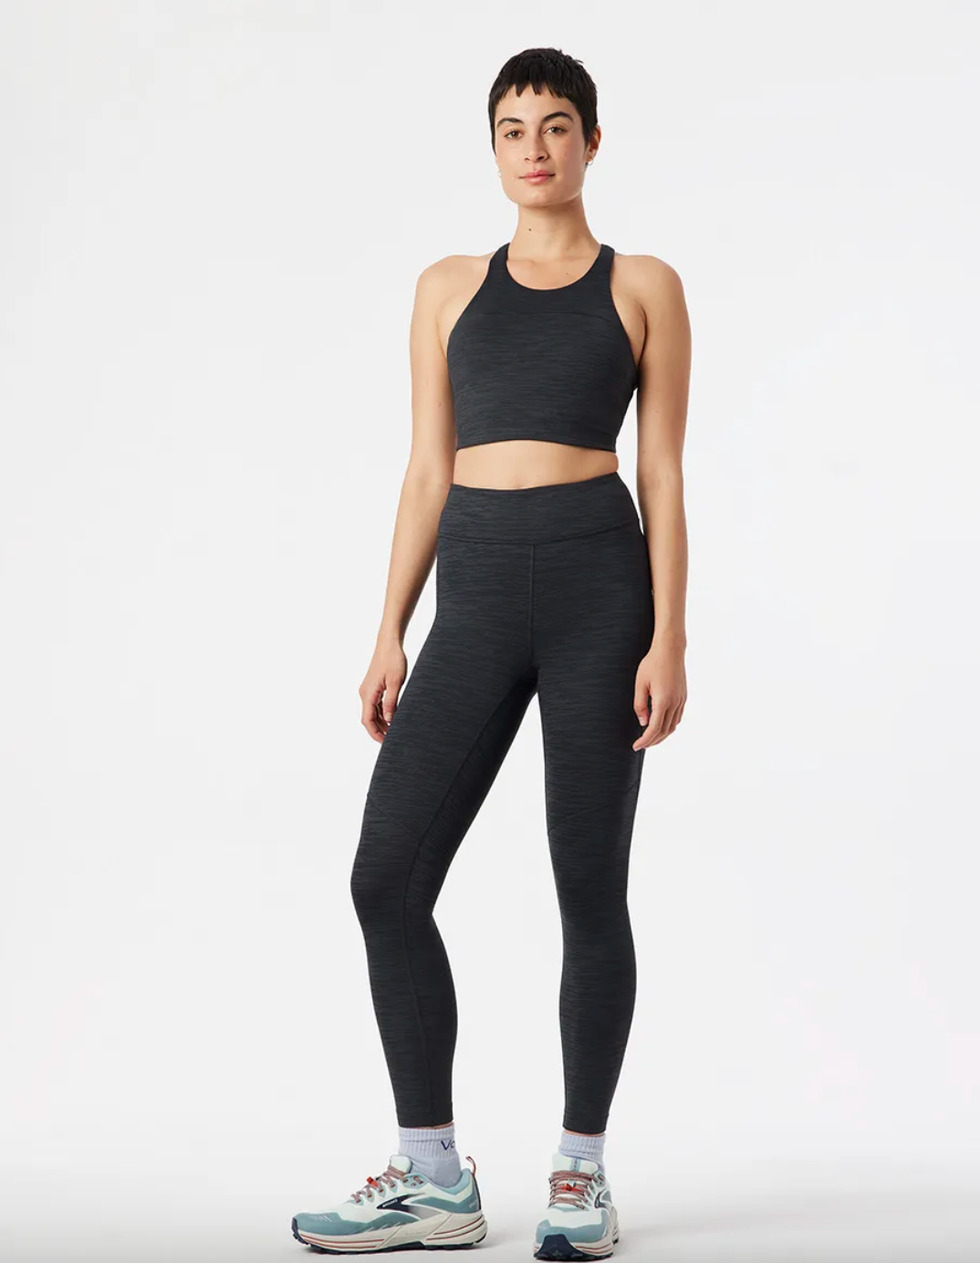 Sports and Outdoors Pro activewear